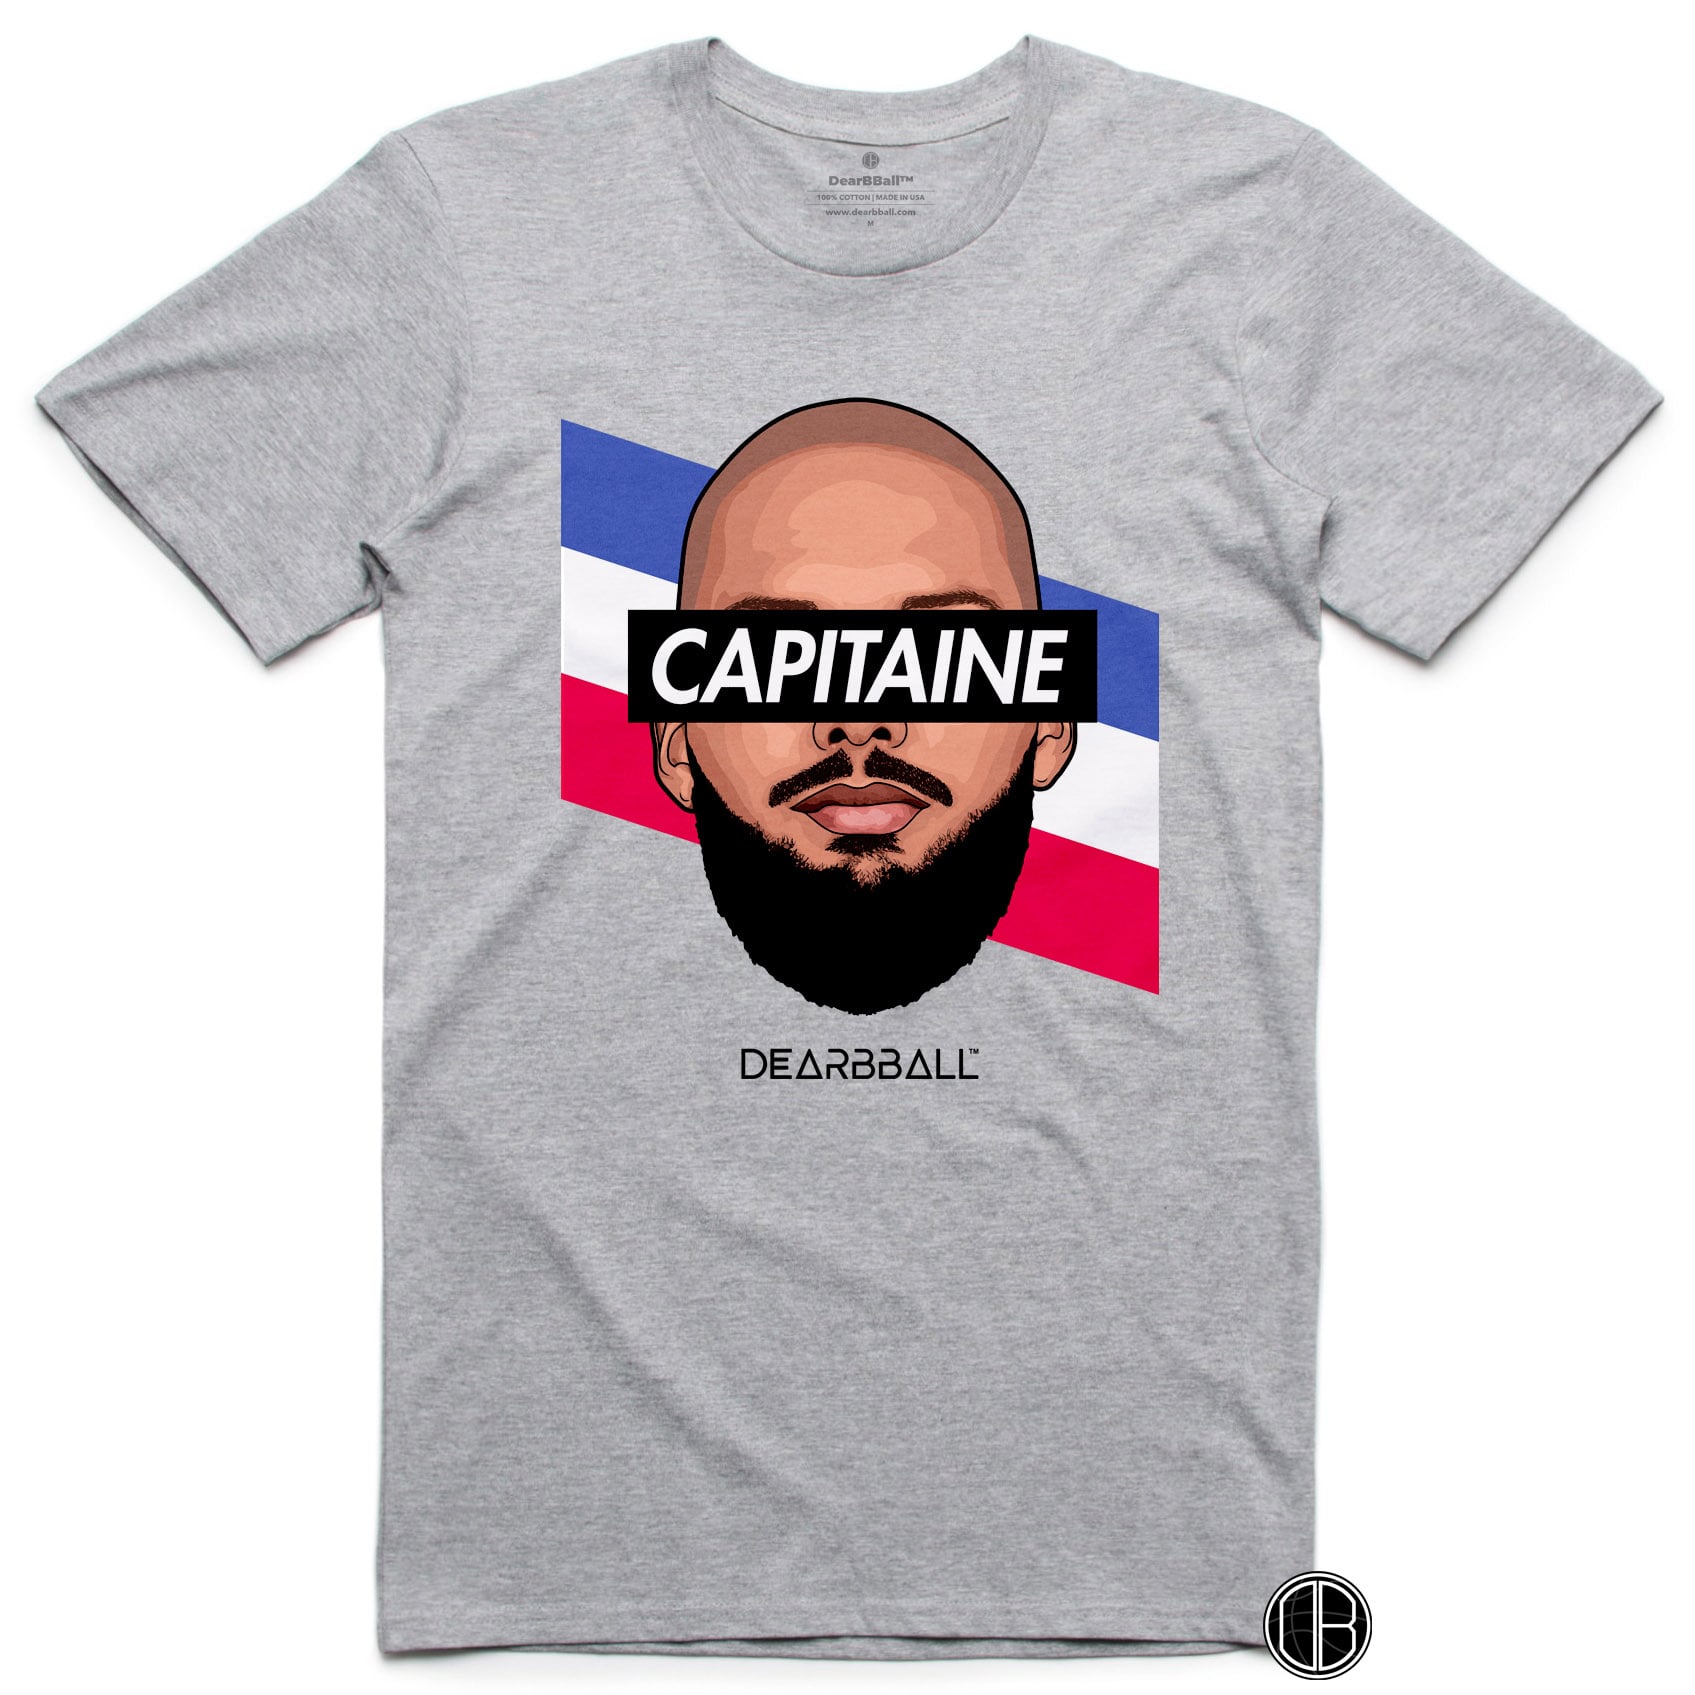 DearBBall T-Shirt - CAPITAINE France Stripes Edition